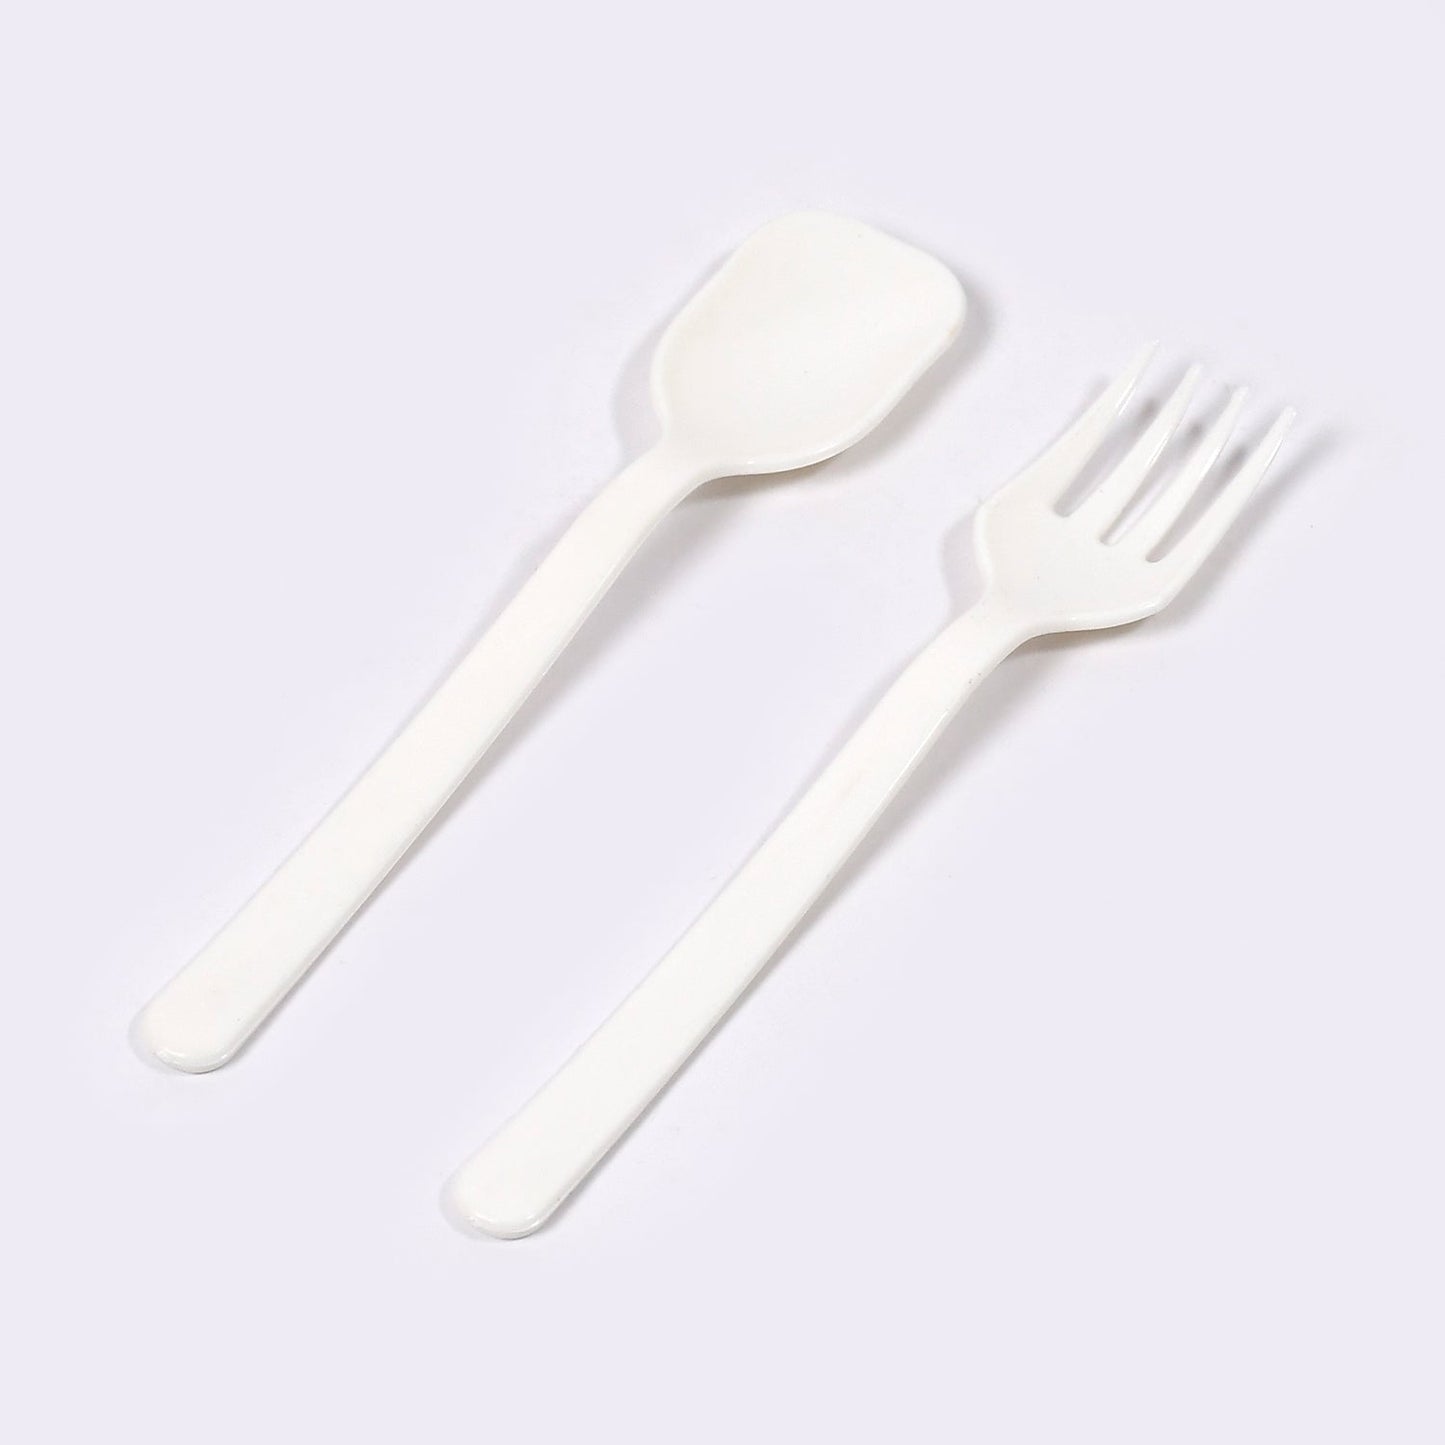 5239 Plastic Forks & spoon Cutlery-Utensils, Parties, Dinners, Catering Services, Family Gatherings ( pack of 2) DeoDap